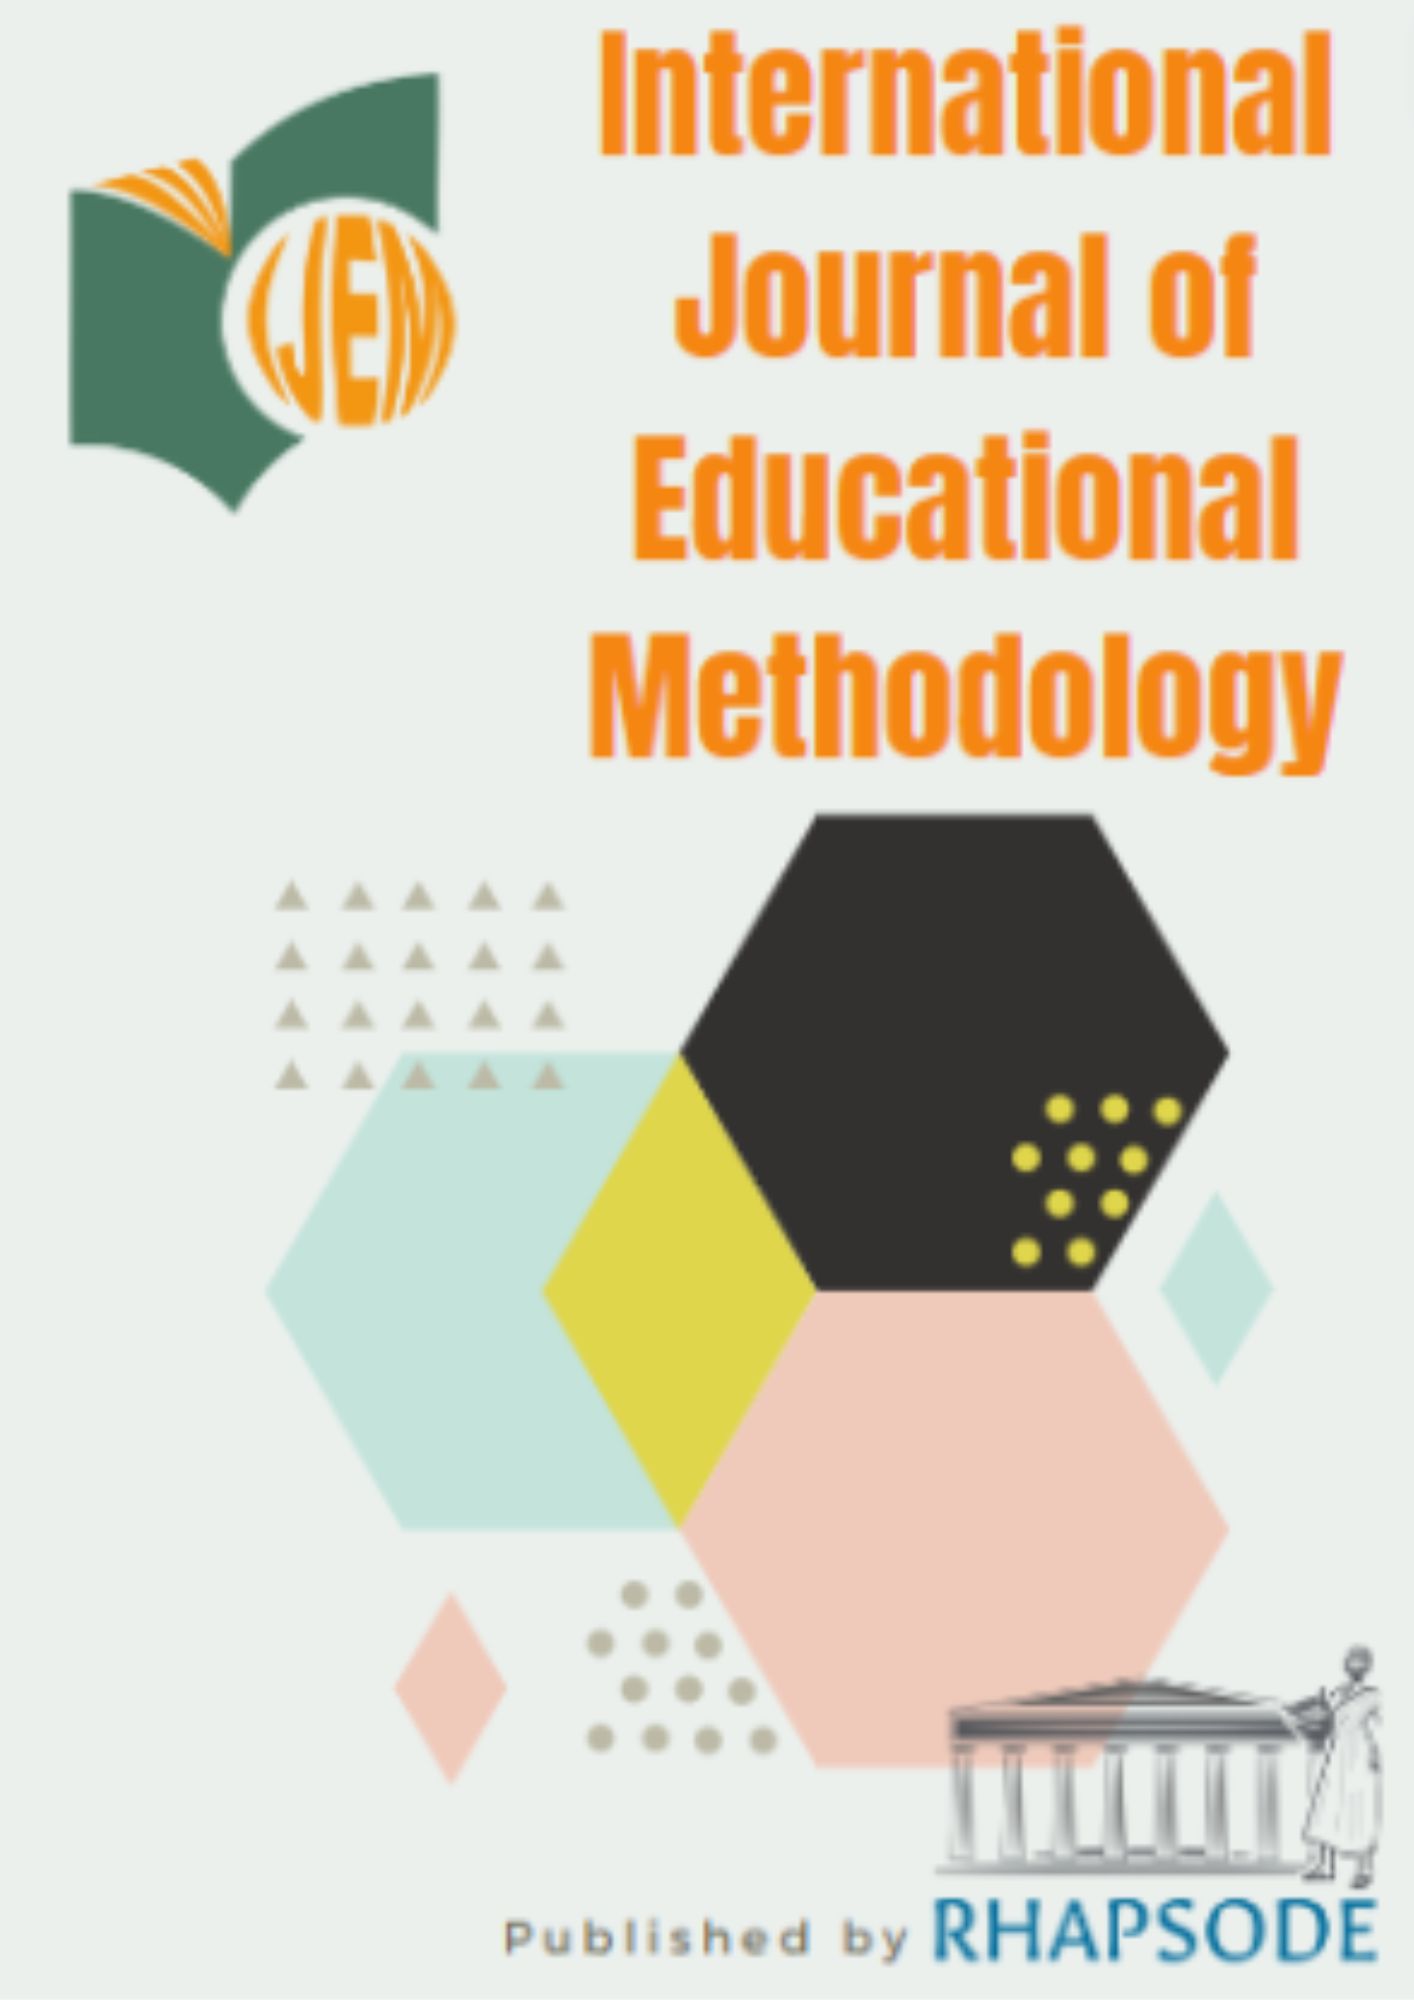 A Structural Equation Modeling of Academic Locus of Control, Procrastination, and Their Impact on School Satisfaction: Insights From the Azerbaijani Educational System